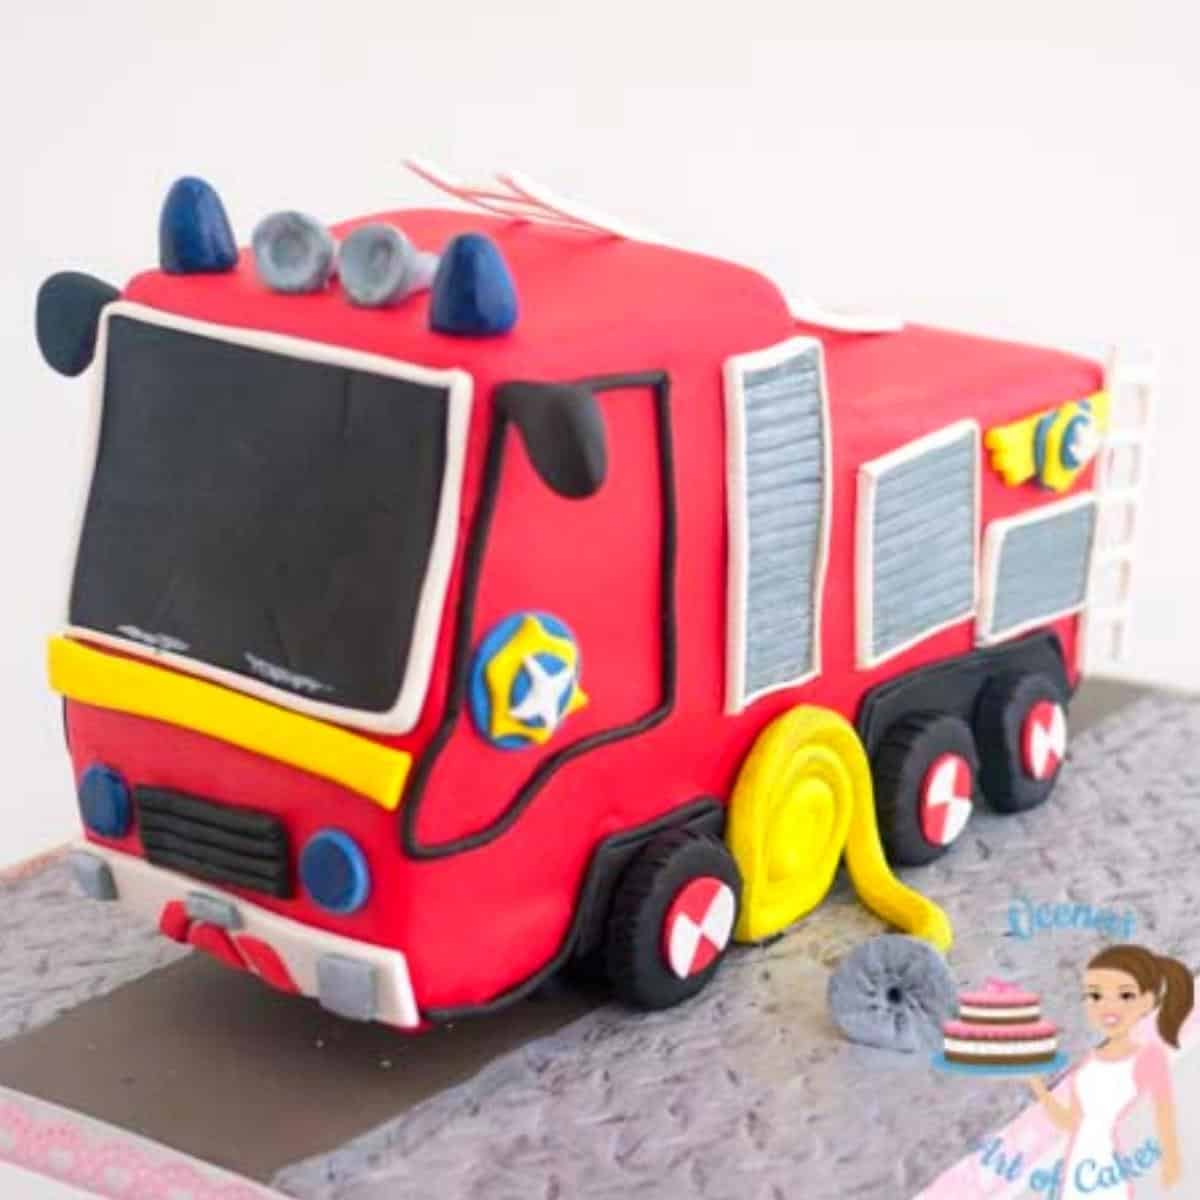 How to Make a Fire Truck Cake